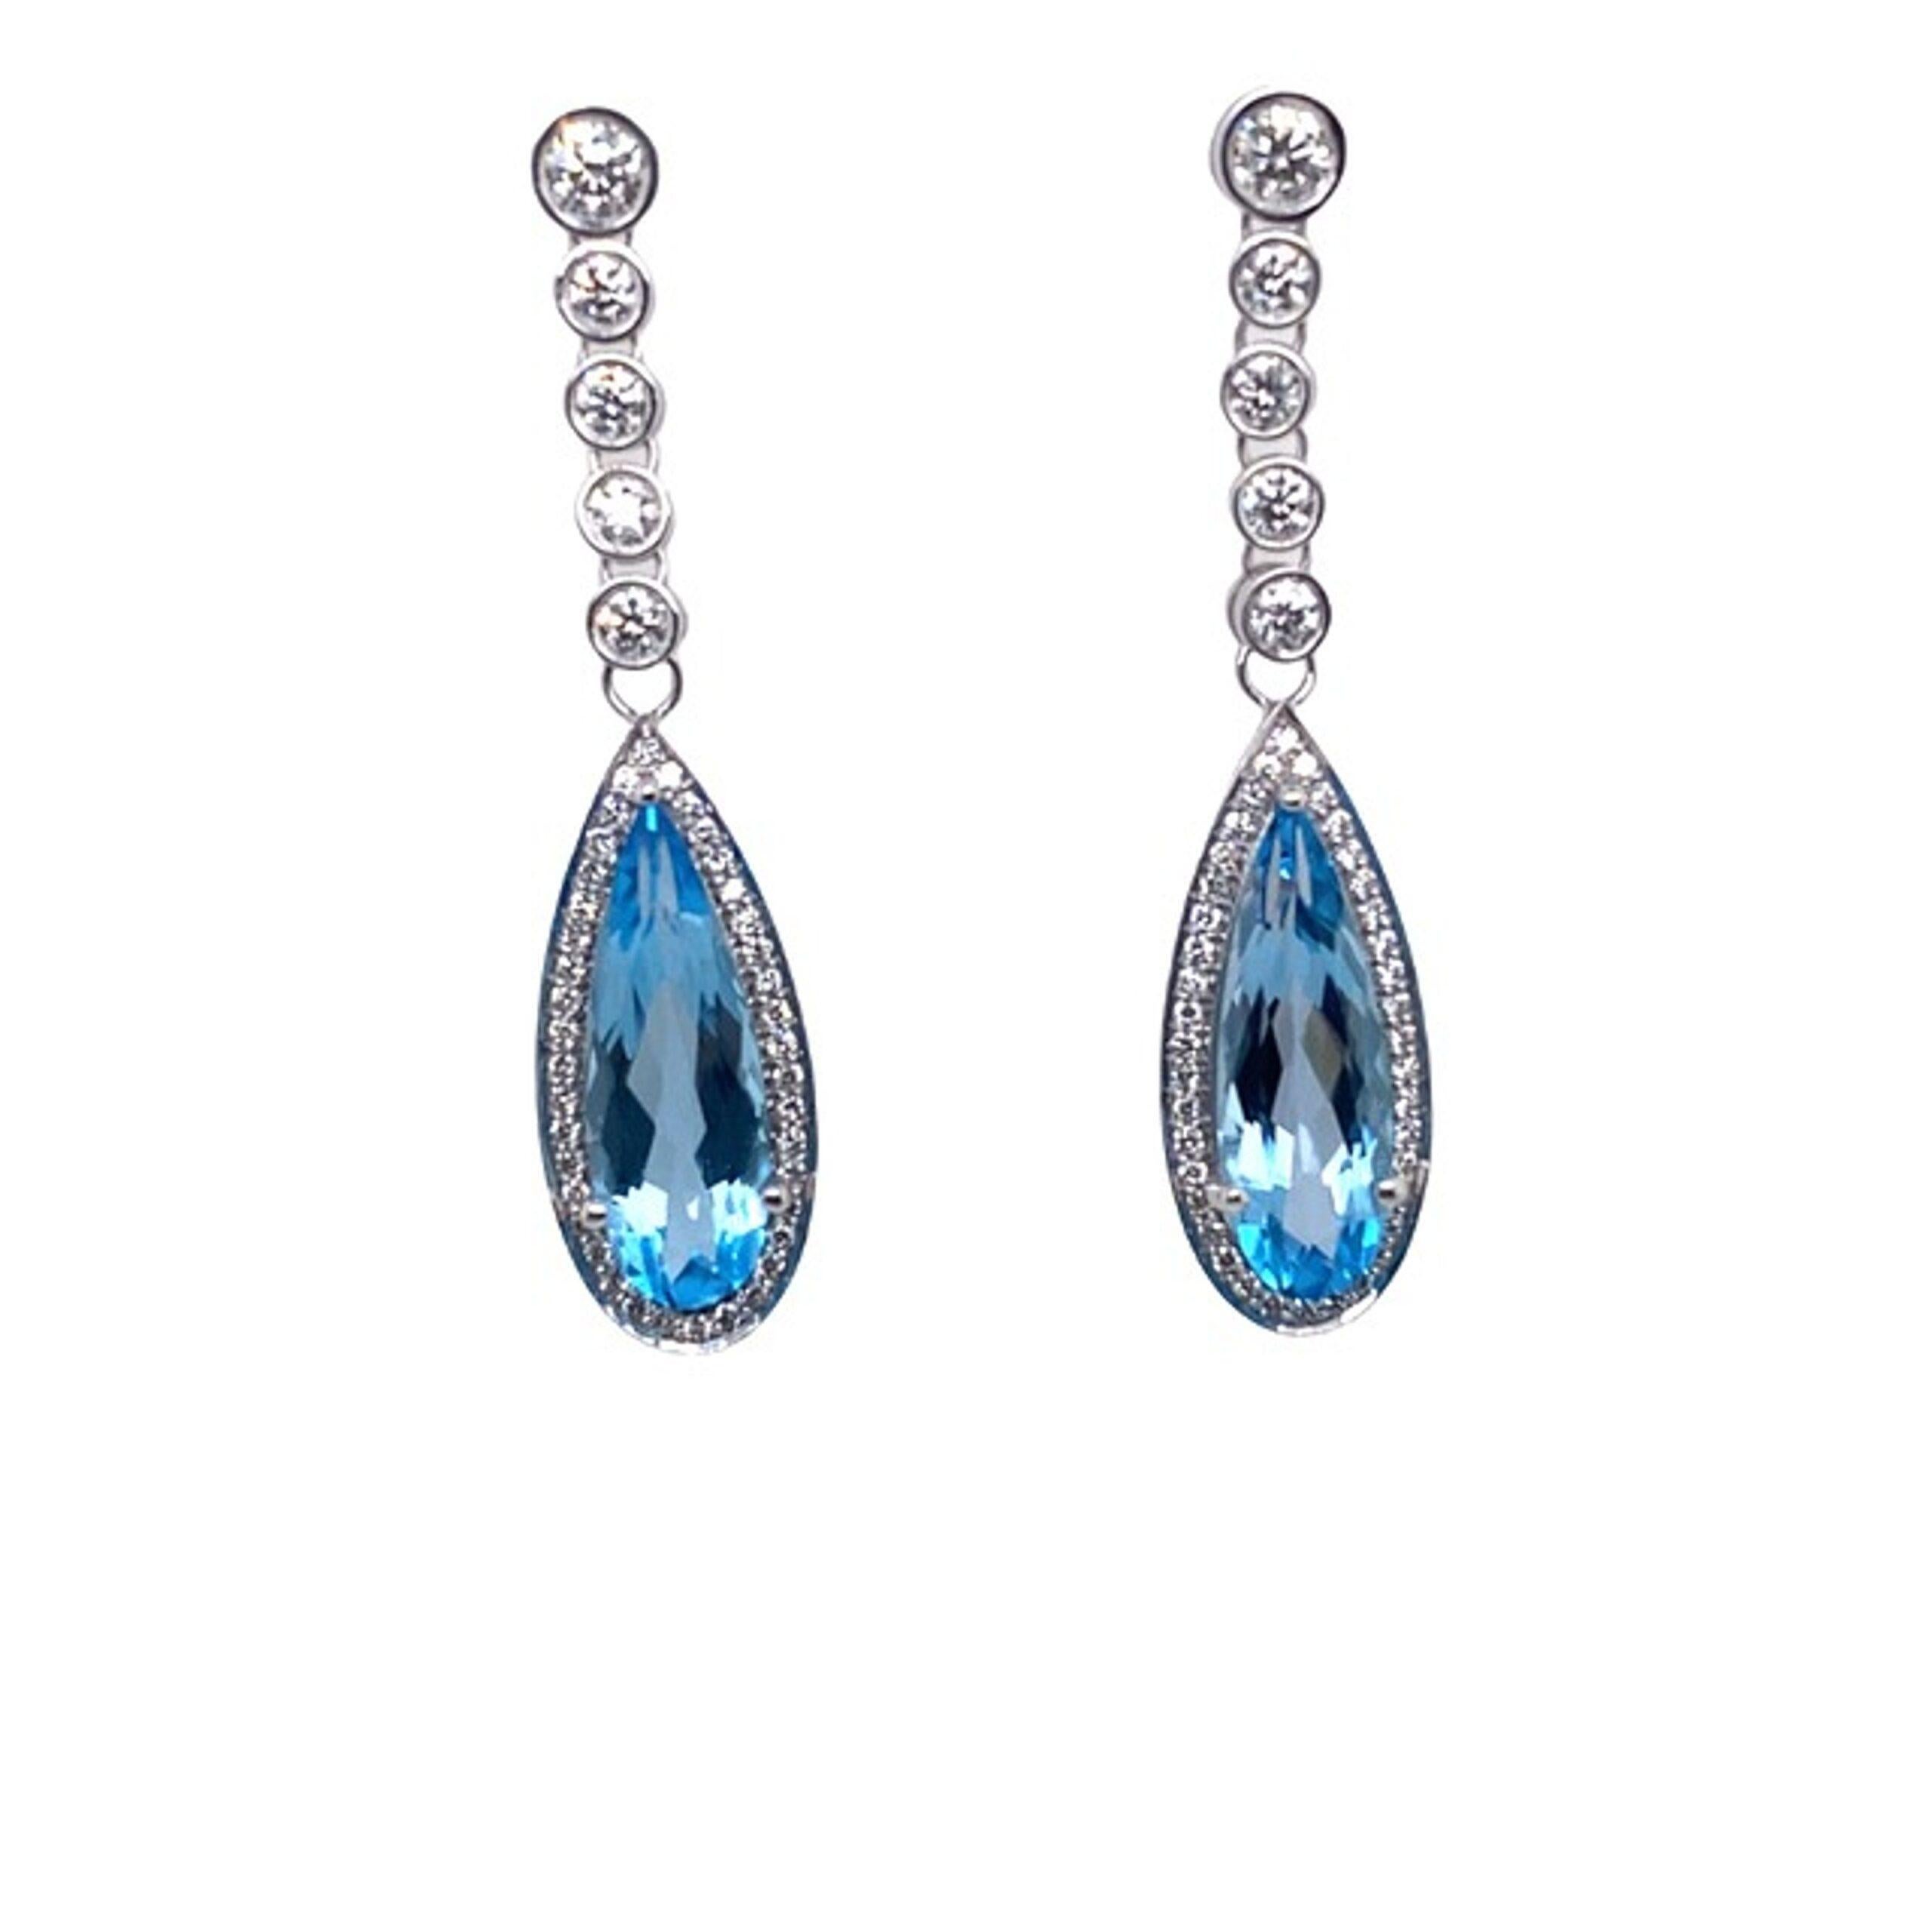 Blue Topaz + Diamond Drop Earrings,  Set With 2.10ct of F/VS Diamonds And 2 Pear Shape Blue Topaz 6.40ct set in 18ct White Gold Made by Jewellery Cave.

Additional Information:
Total Diamond Weight: 2.10ct 
Diamond Colour: F
Diamond Clarity: